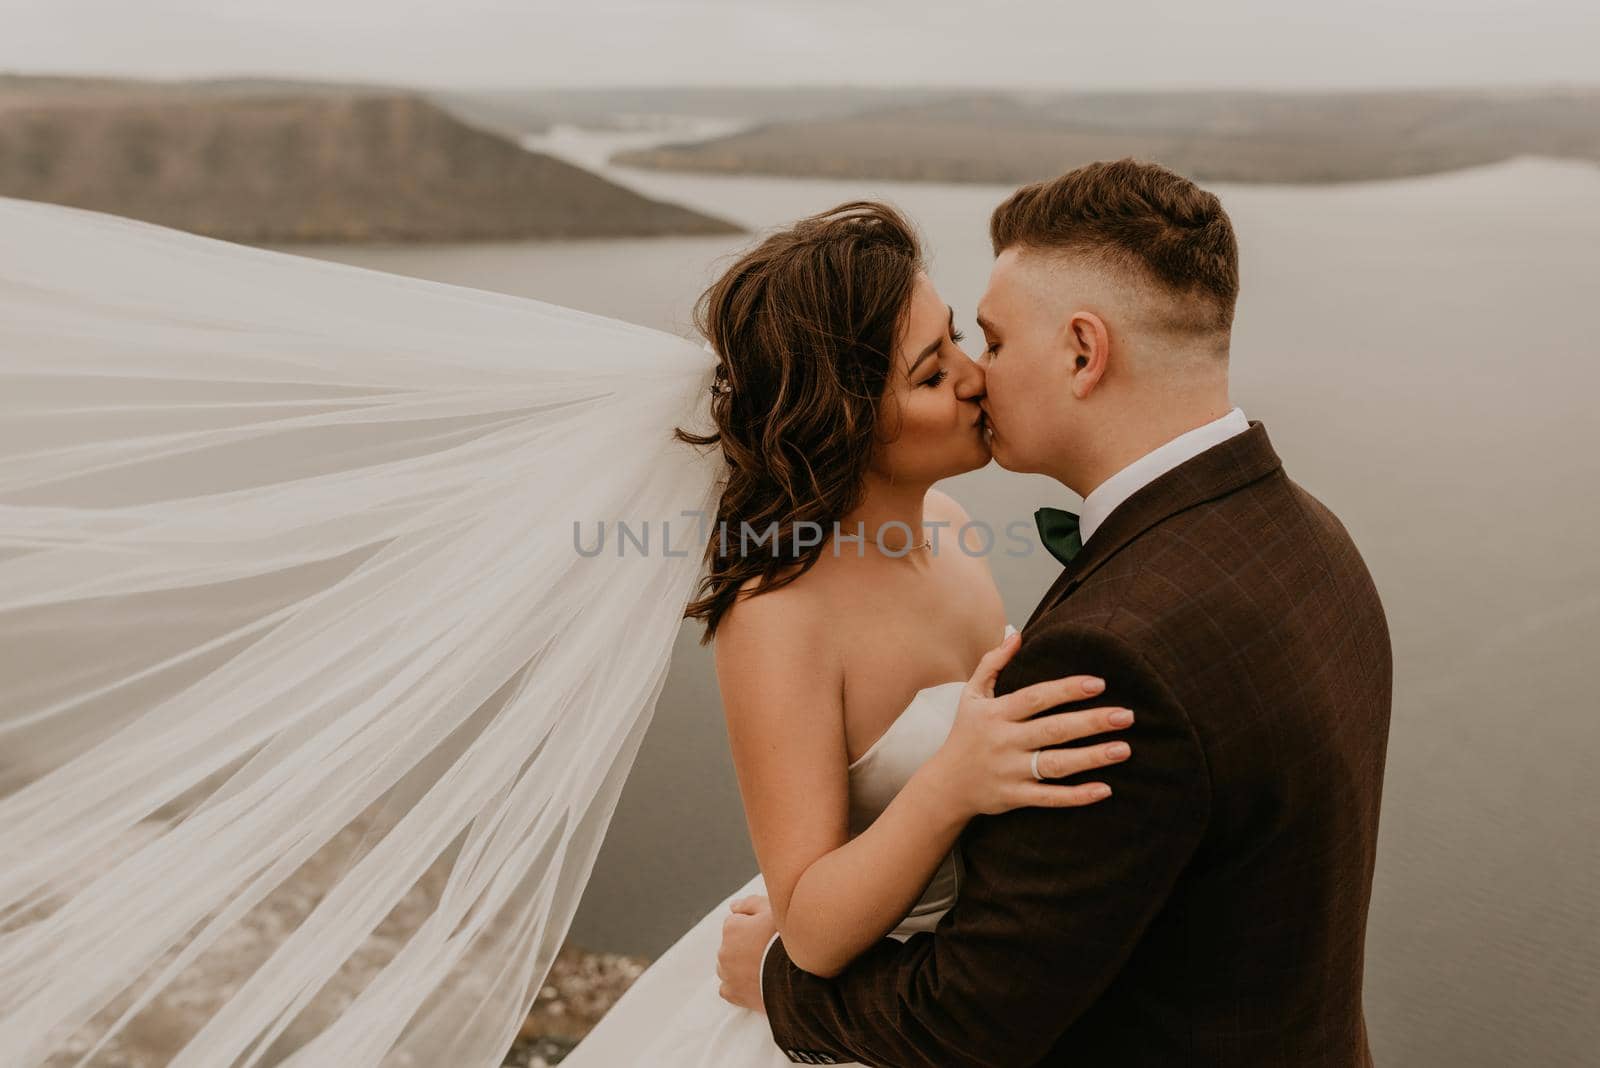 loving couple wedding newlyweds outdoor. bride in white dress long veil and groom in suit walk in summer fall on mountain above river. sunrise. man and woman on rocks above cliff. bakota ukraine